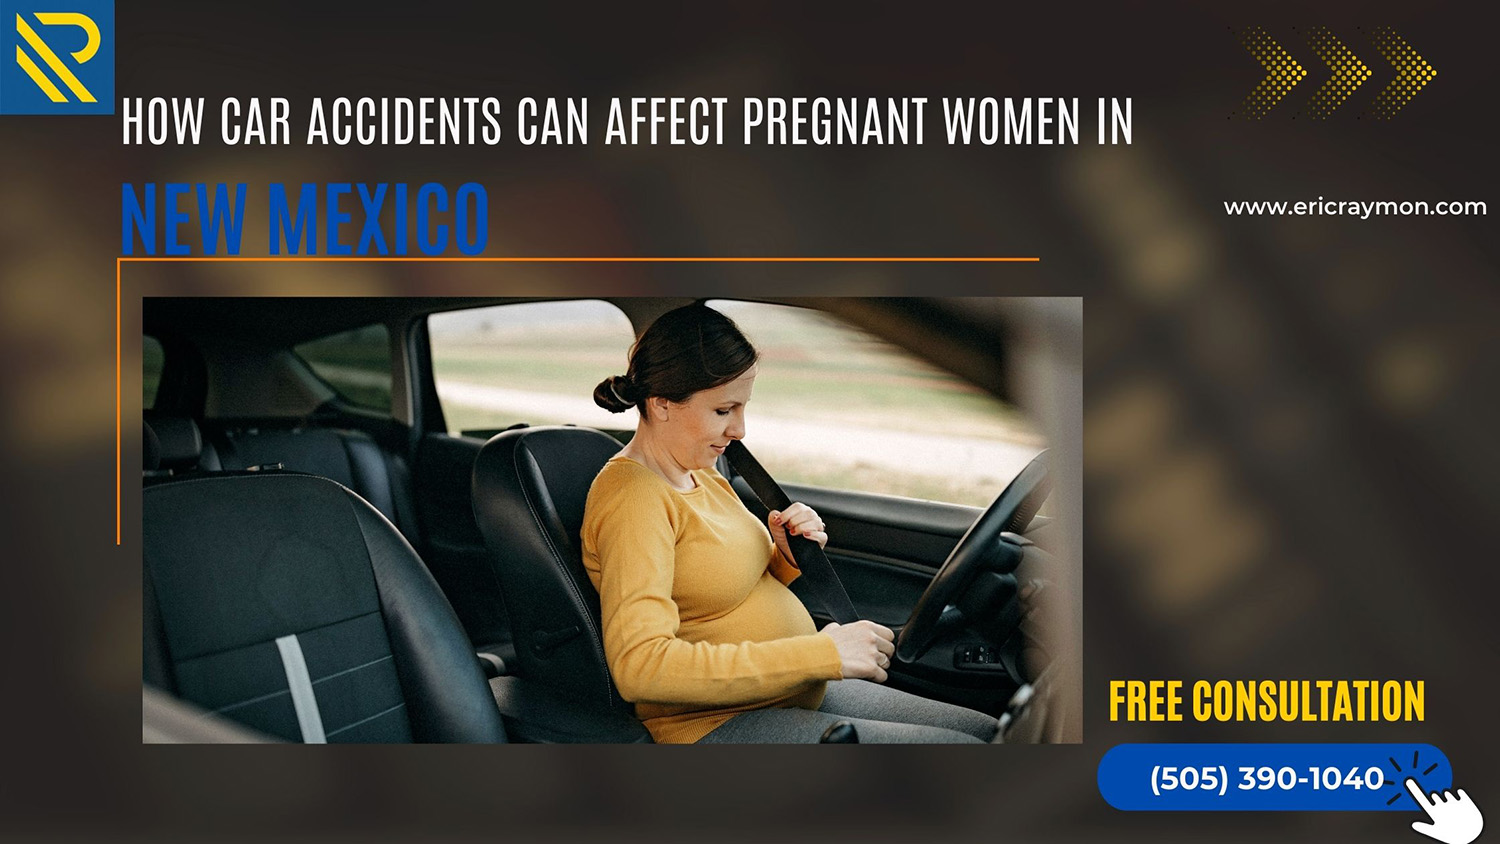 How Car Accidents Can Affect Pregnant Women in New Mexico